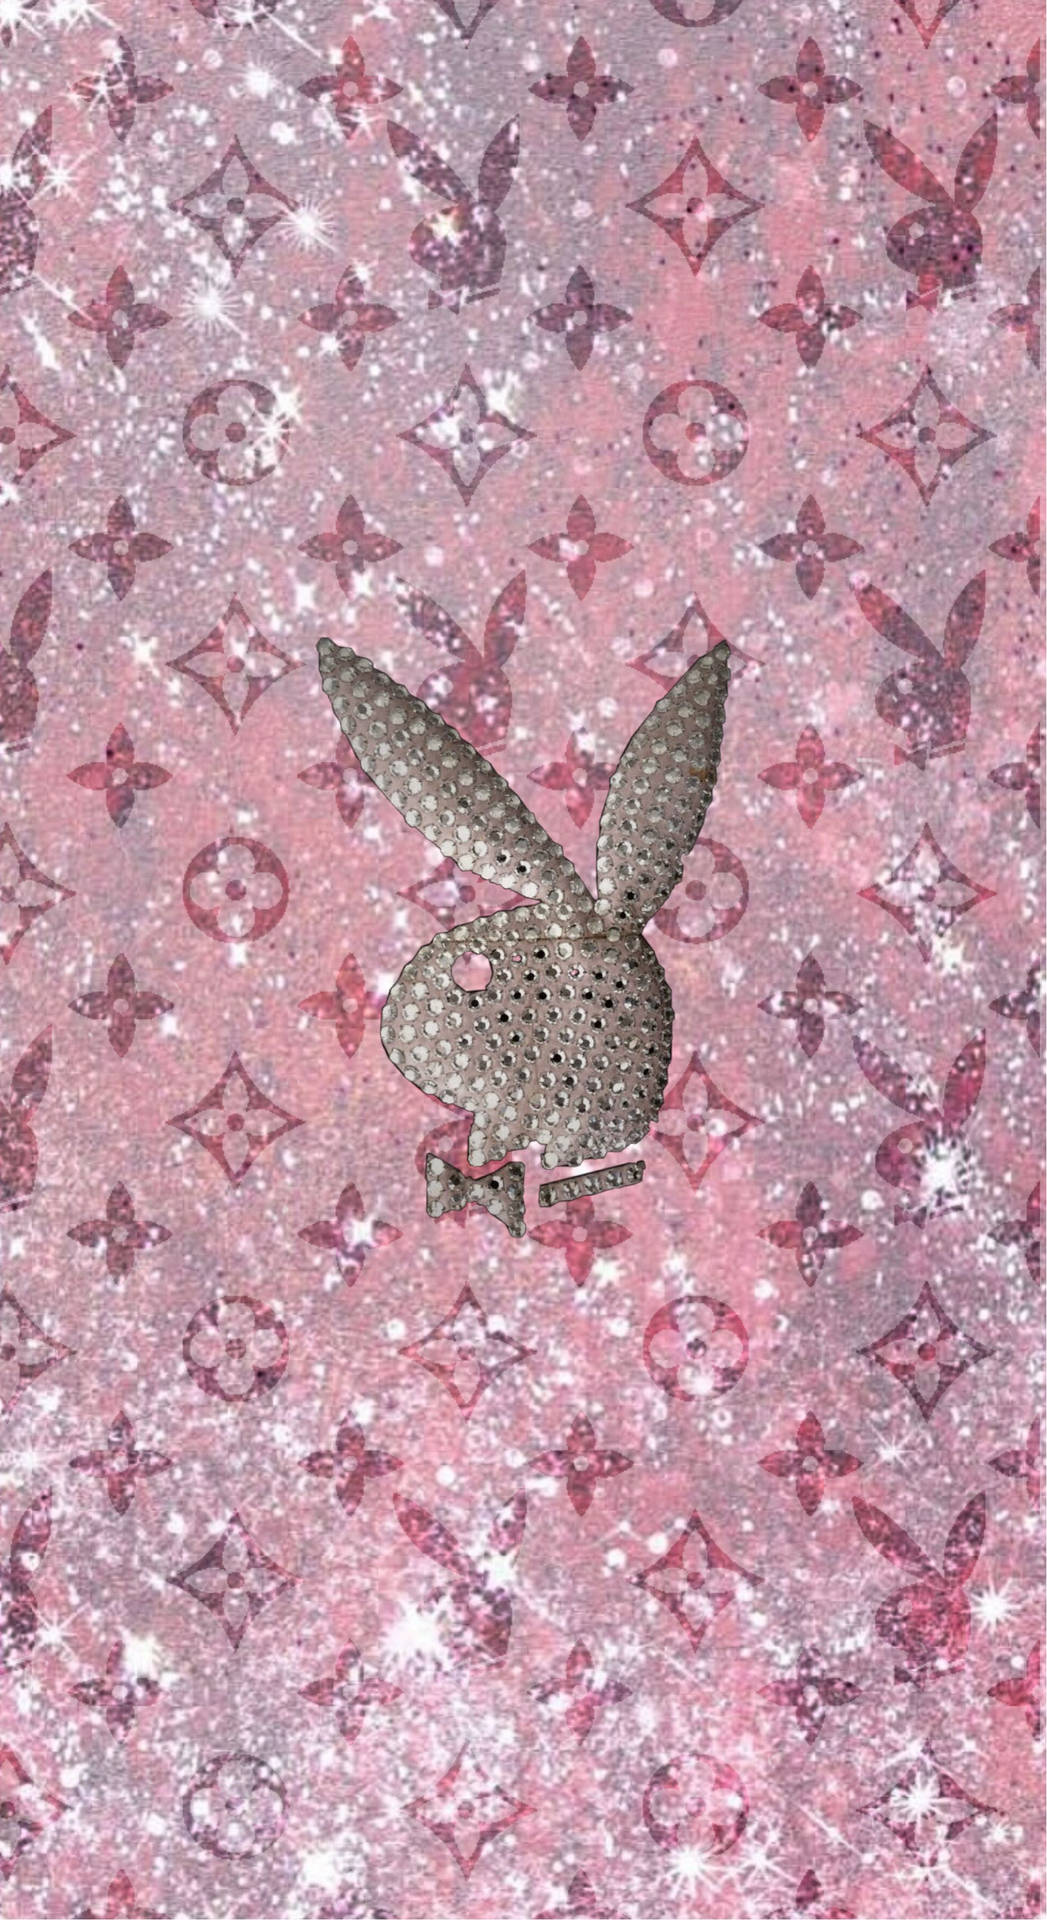 Playboy Aesthetic Sparkly Wallpaper